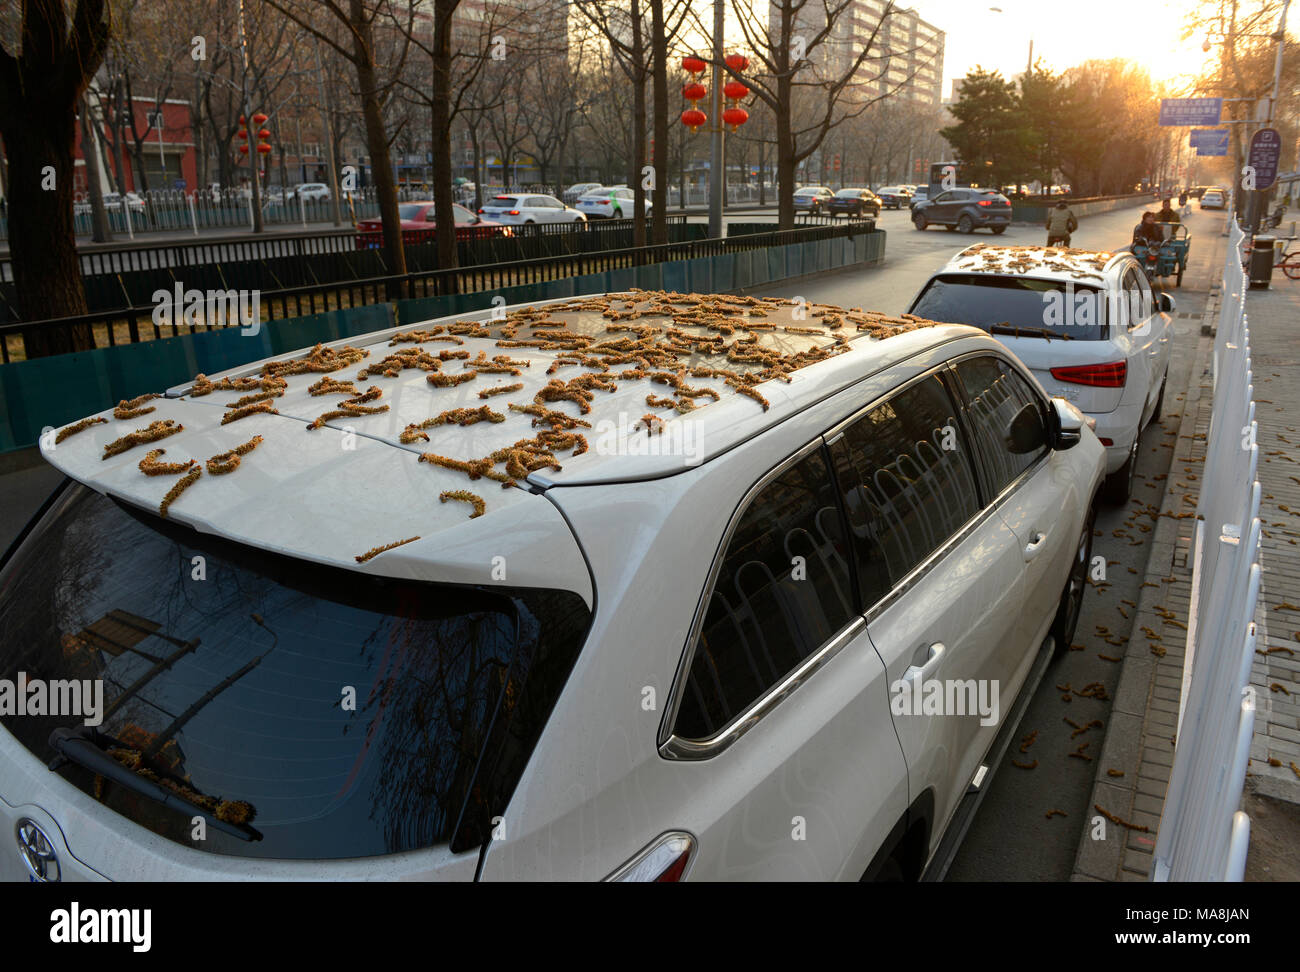 catkins-carpet-a-car-parked-under-trees-in-chaoyang-district-eastern-beijing-china-MA8JAN.jpg